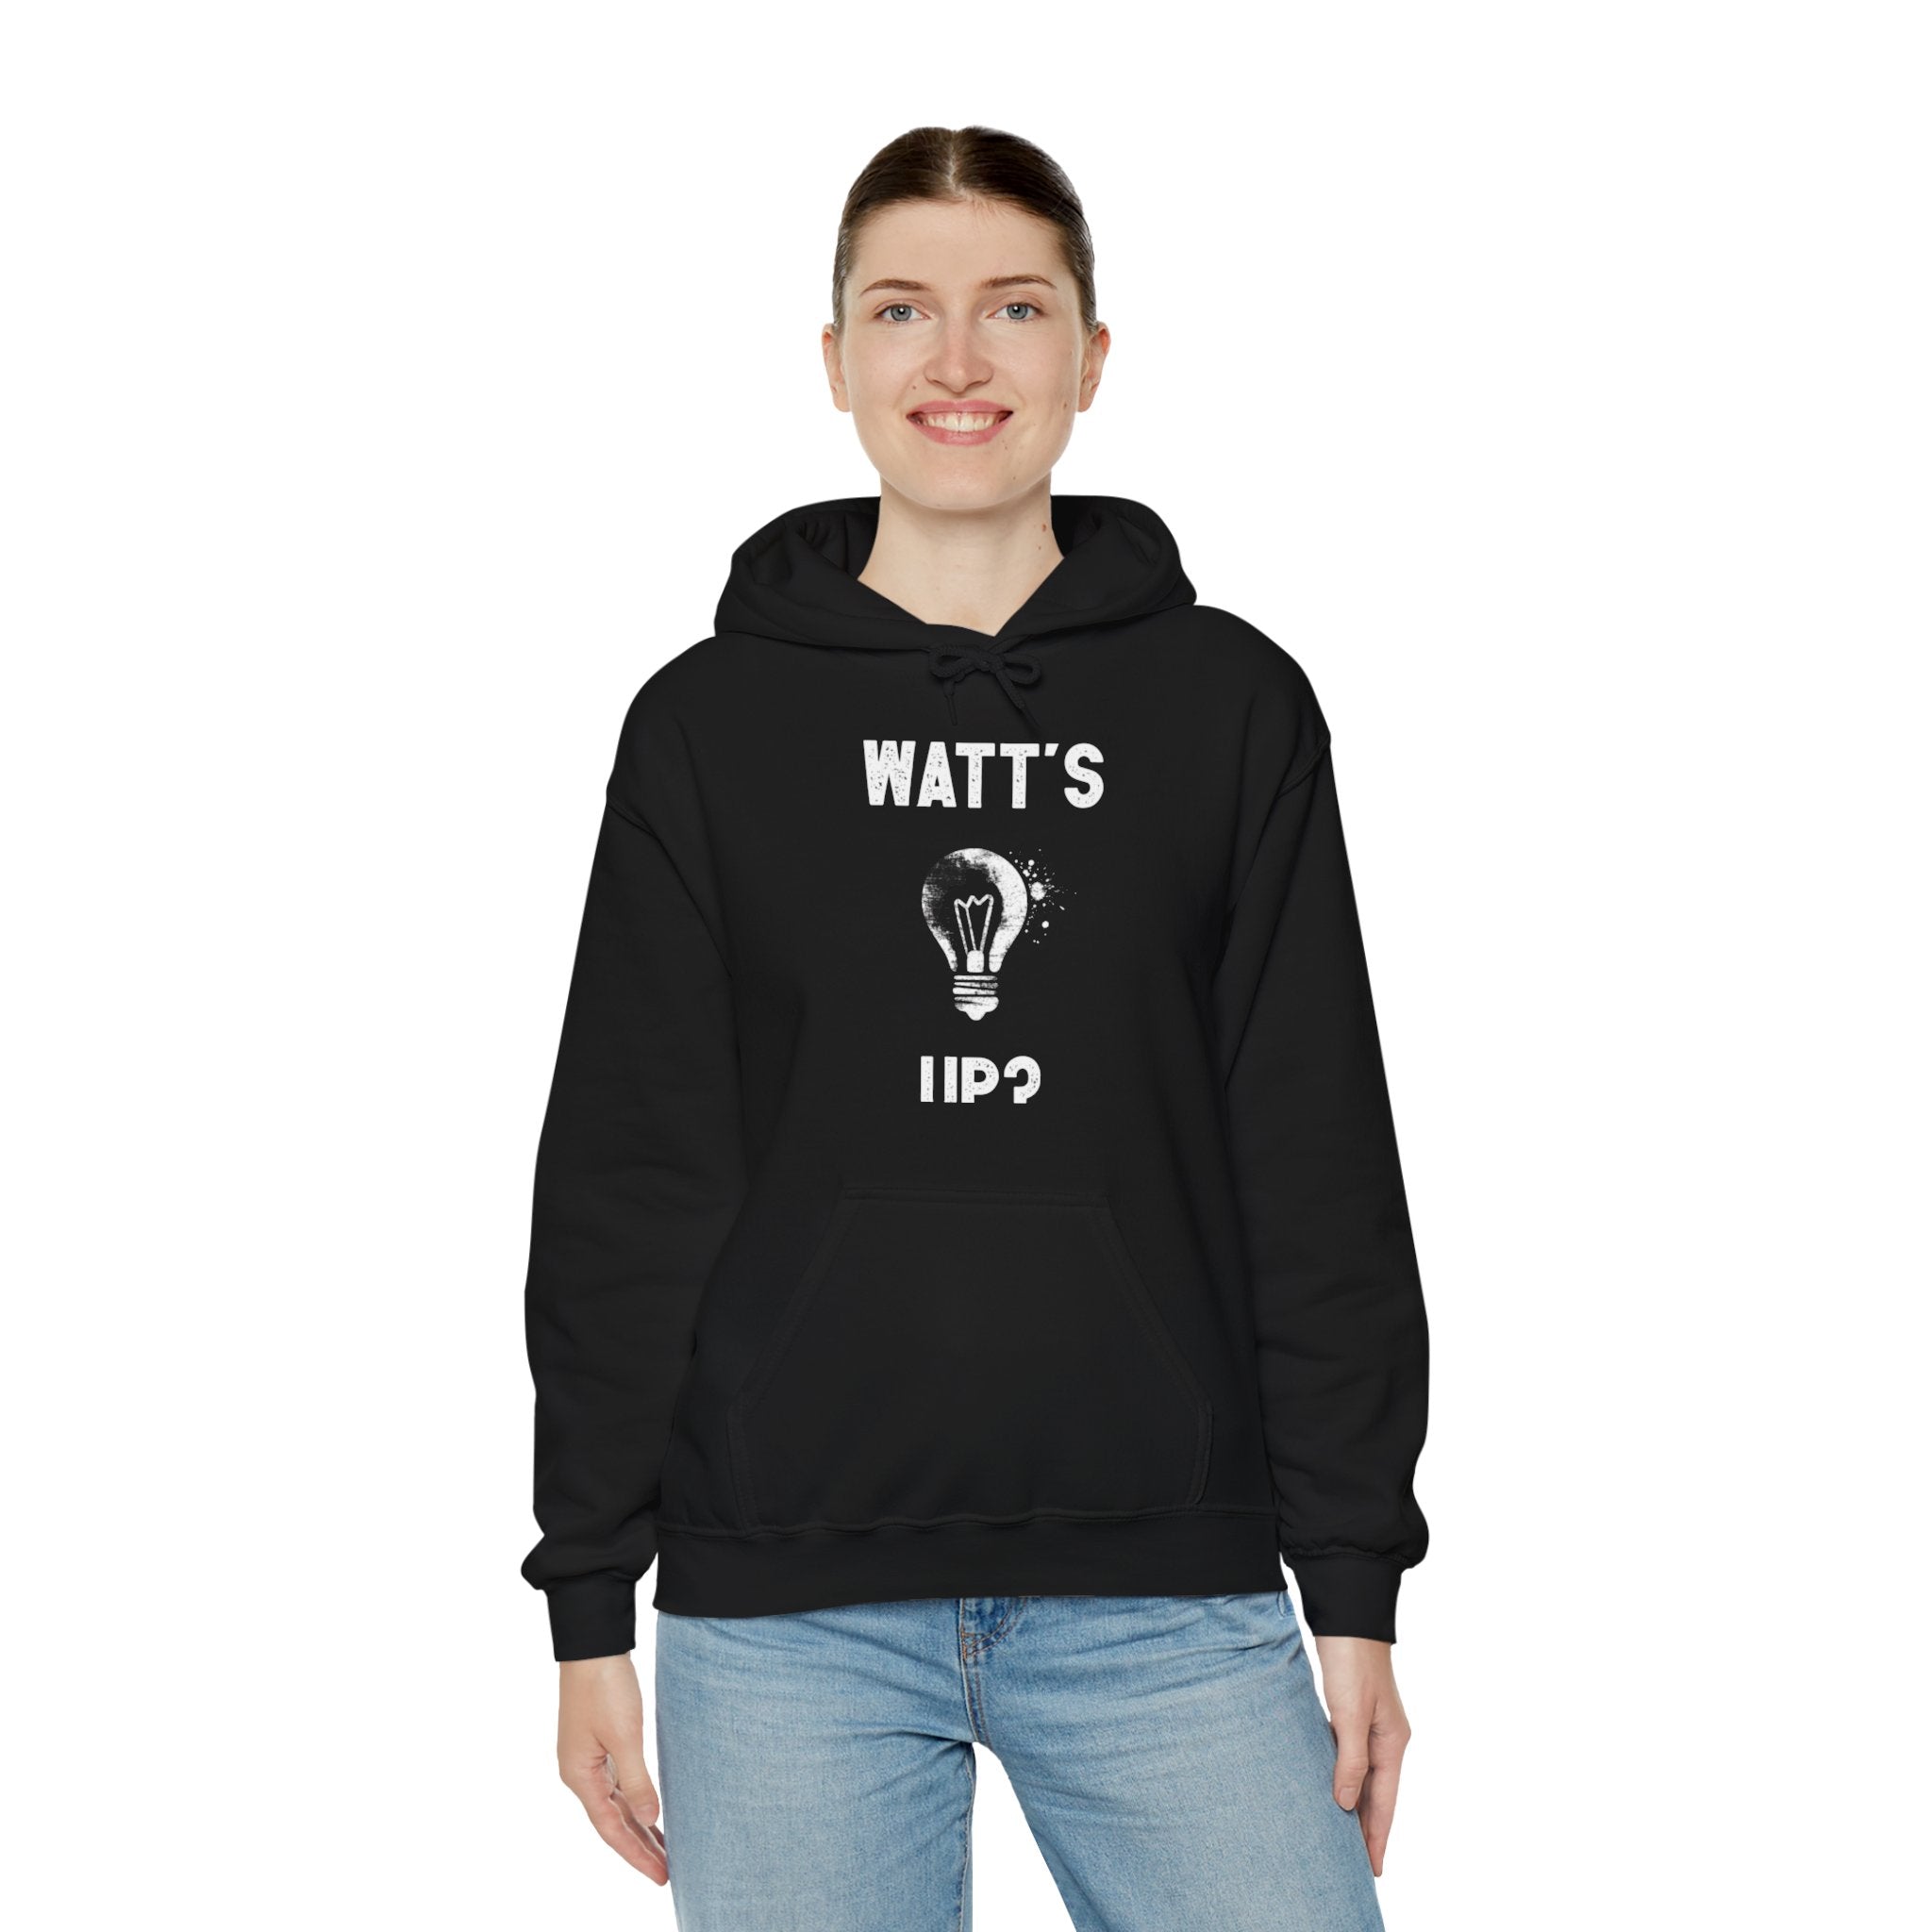 A fashion lover sporting a Watts Up - Hooded Sweatshirt with the text "WATT'S UP?" and a lightbulb graphic on the front.